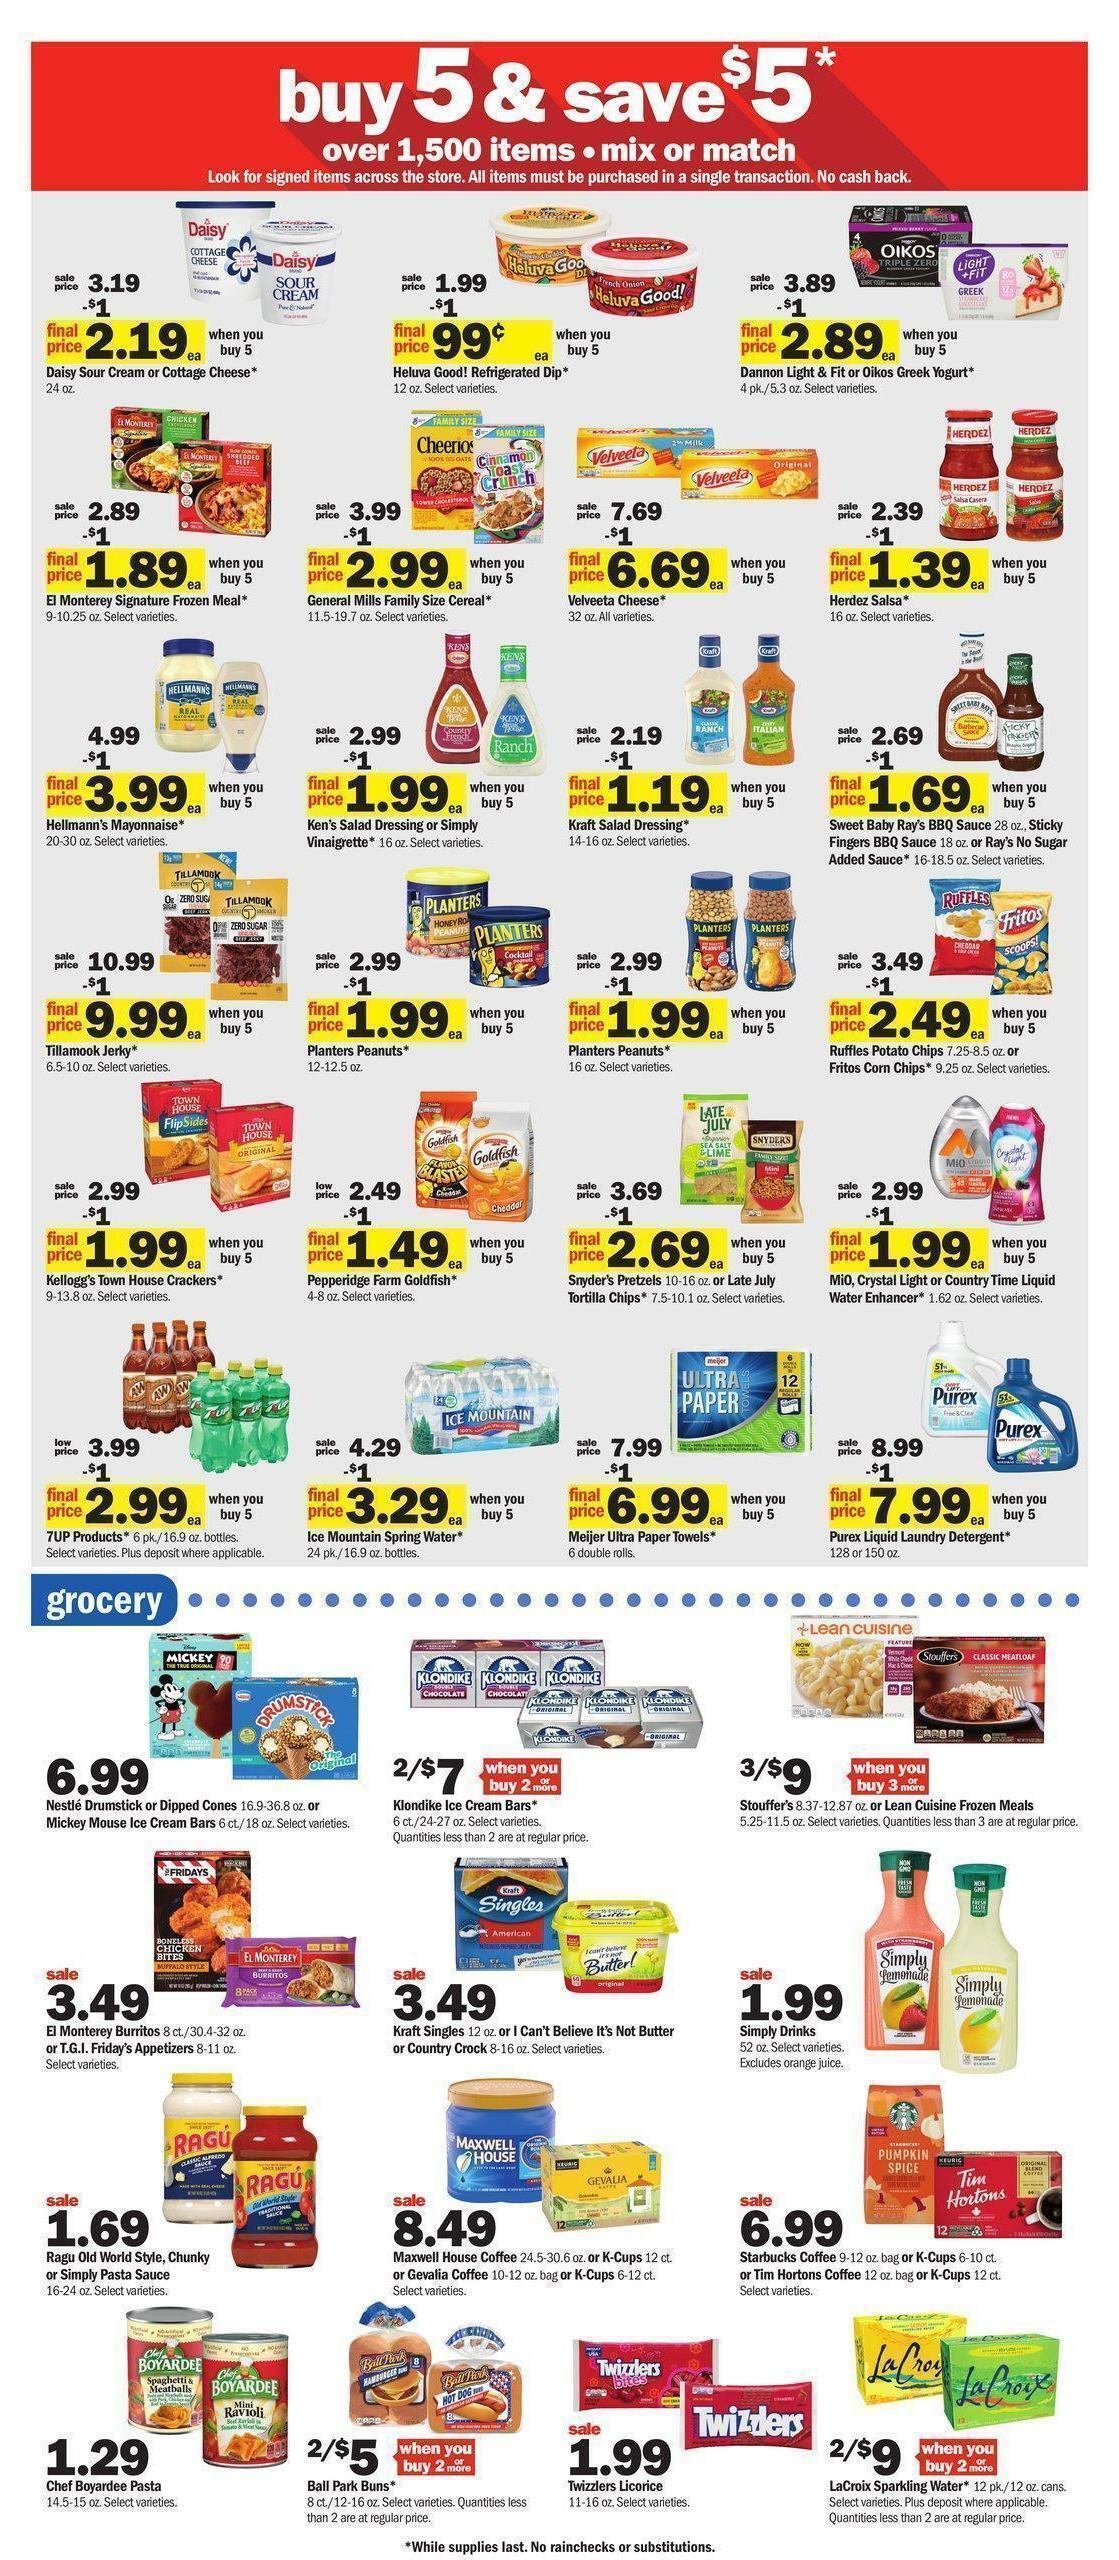 Meijer Weekly Ad from August 28